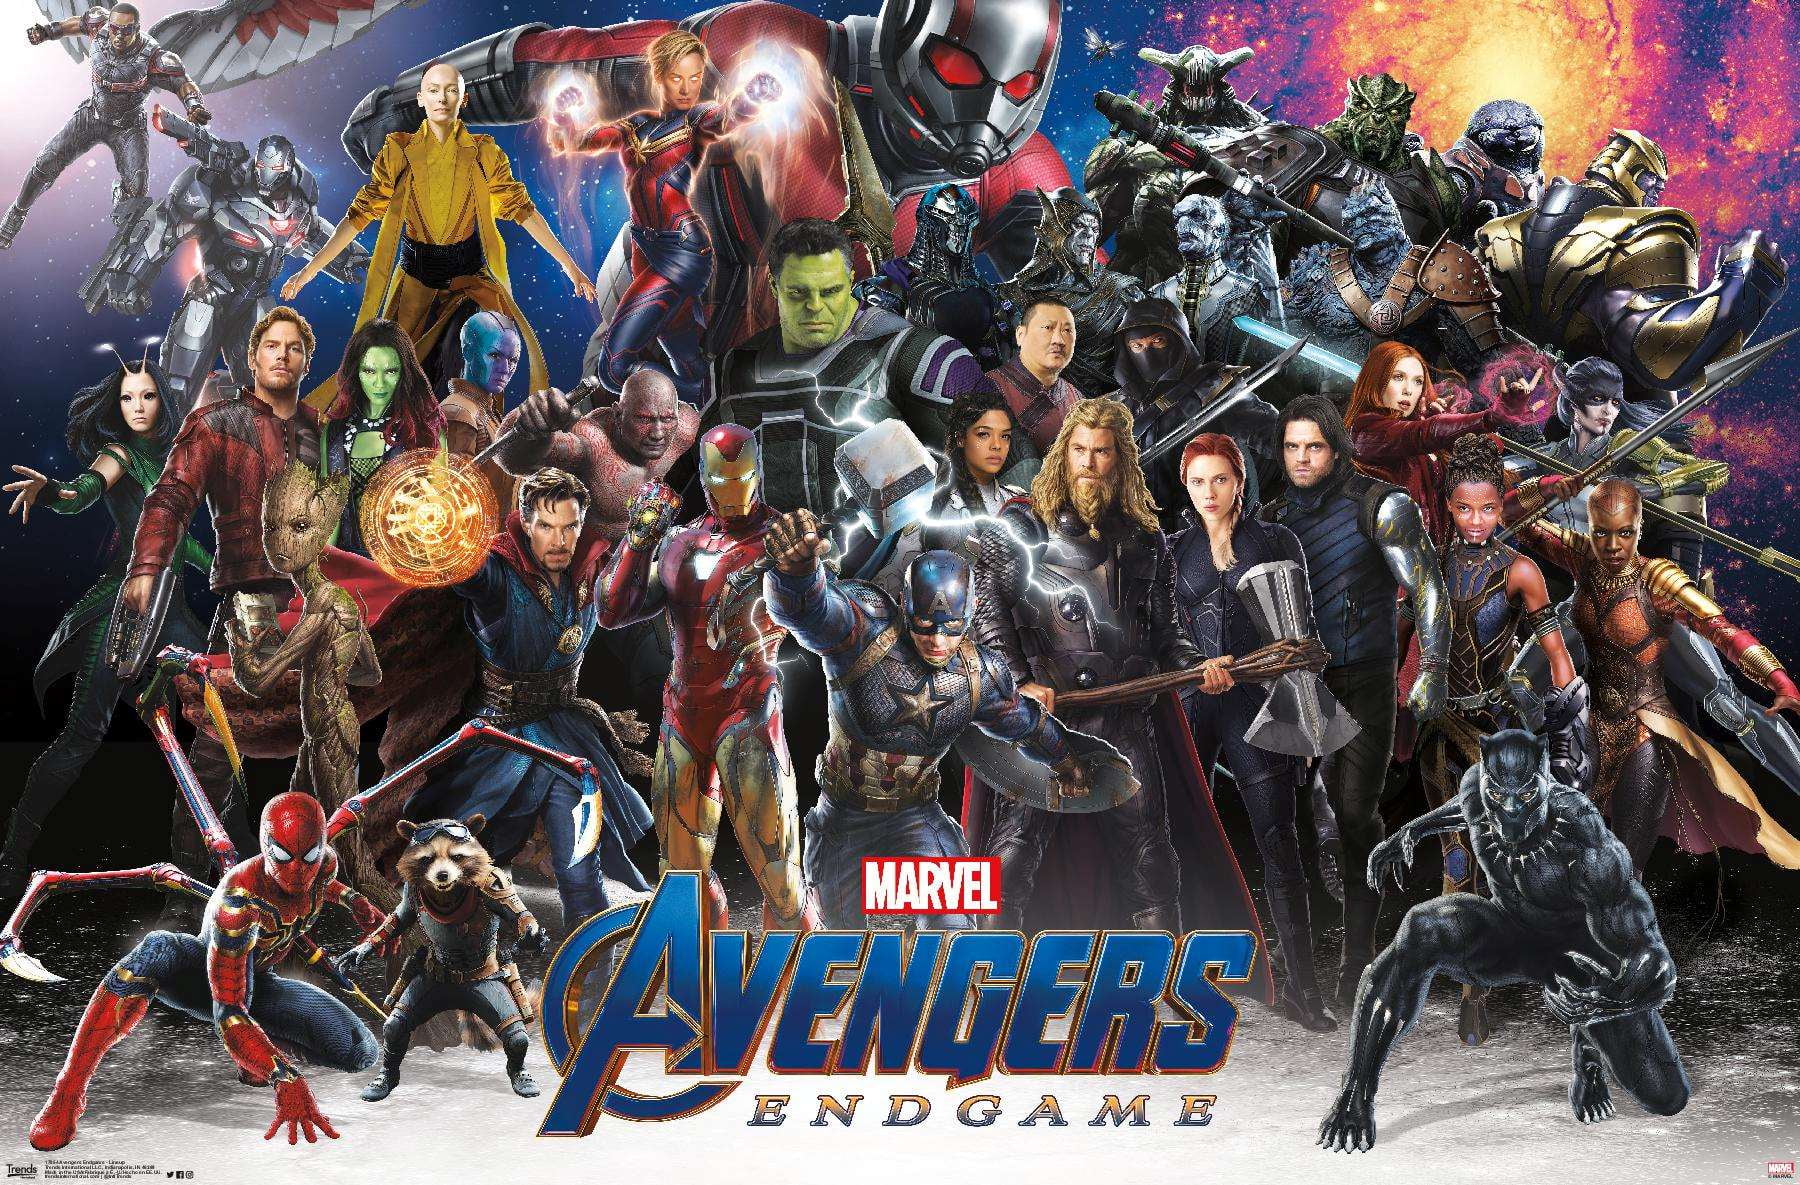 Marvel Cinematic Universe - Avengers - Endgame - Lineup Wall Poster,  14.725 x 22.375 